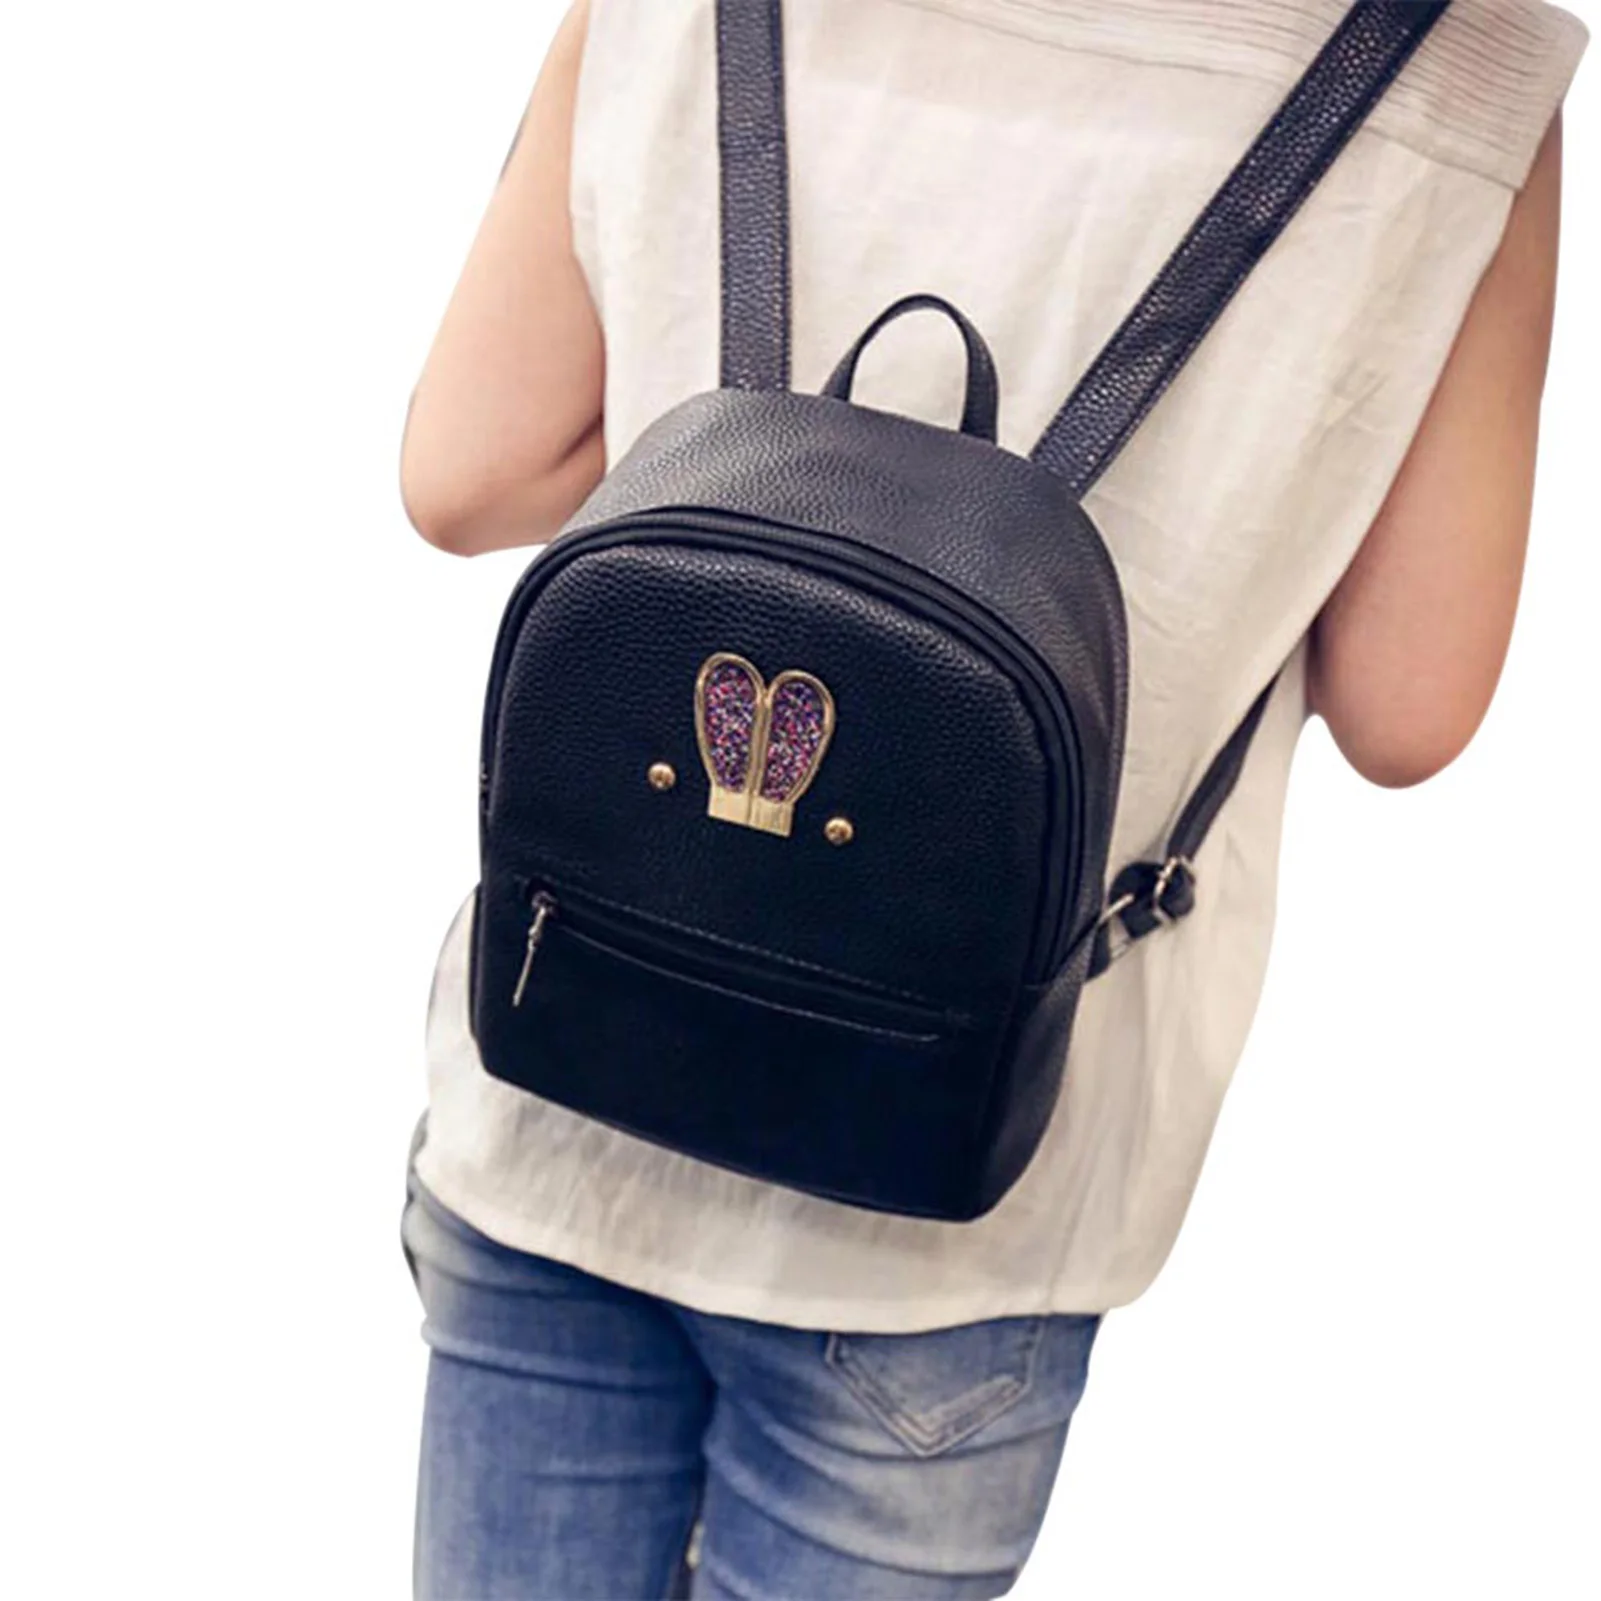 

Classical Rabbit Ears Daypack Backpack Anti Theft Daypacks with Large Main Compartment for Outdoor College Workplace